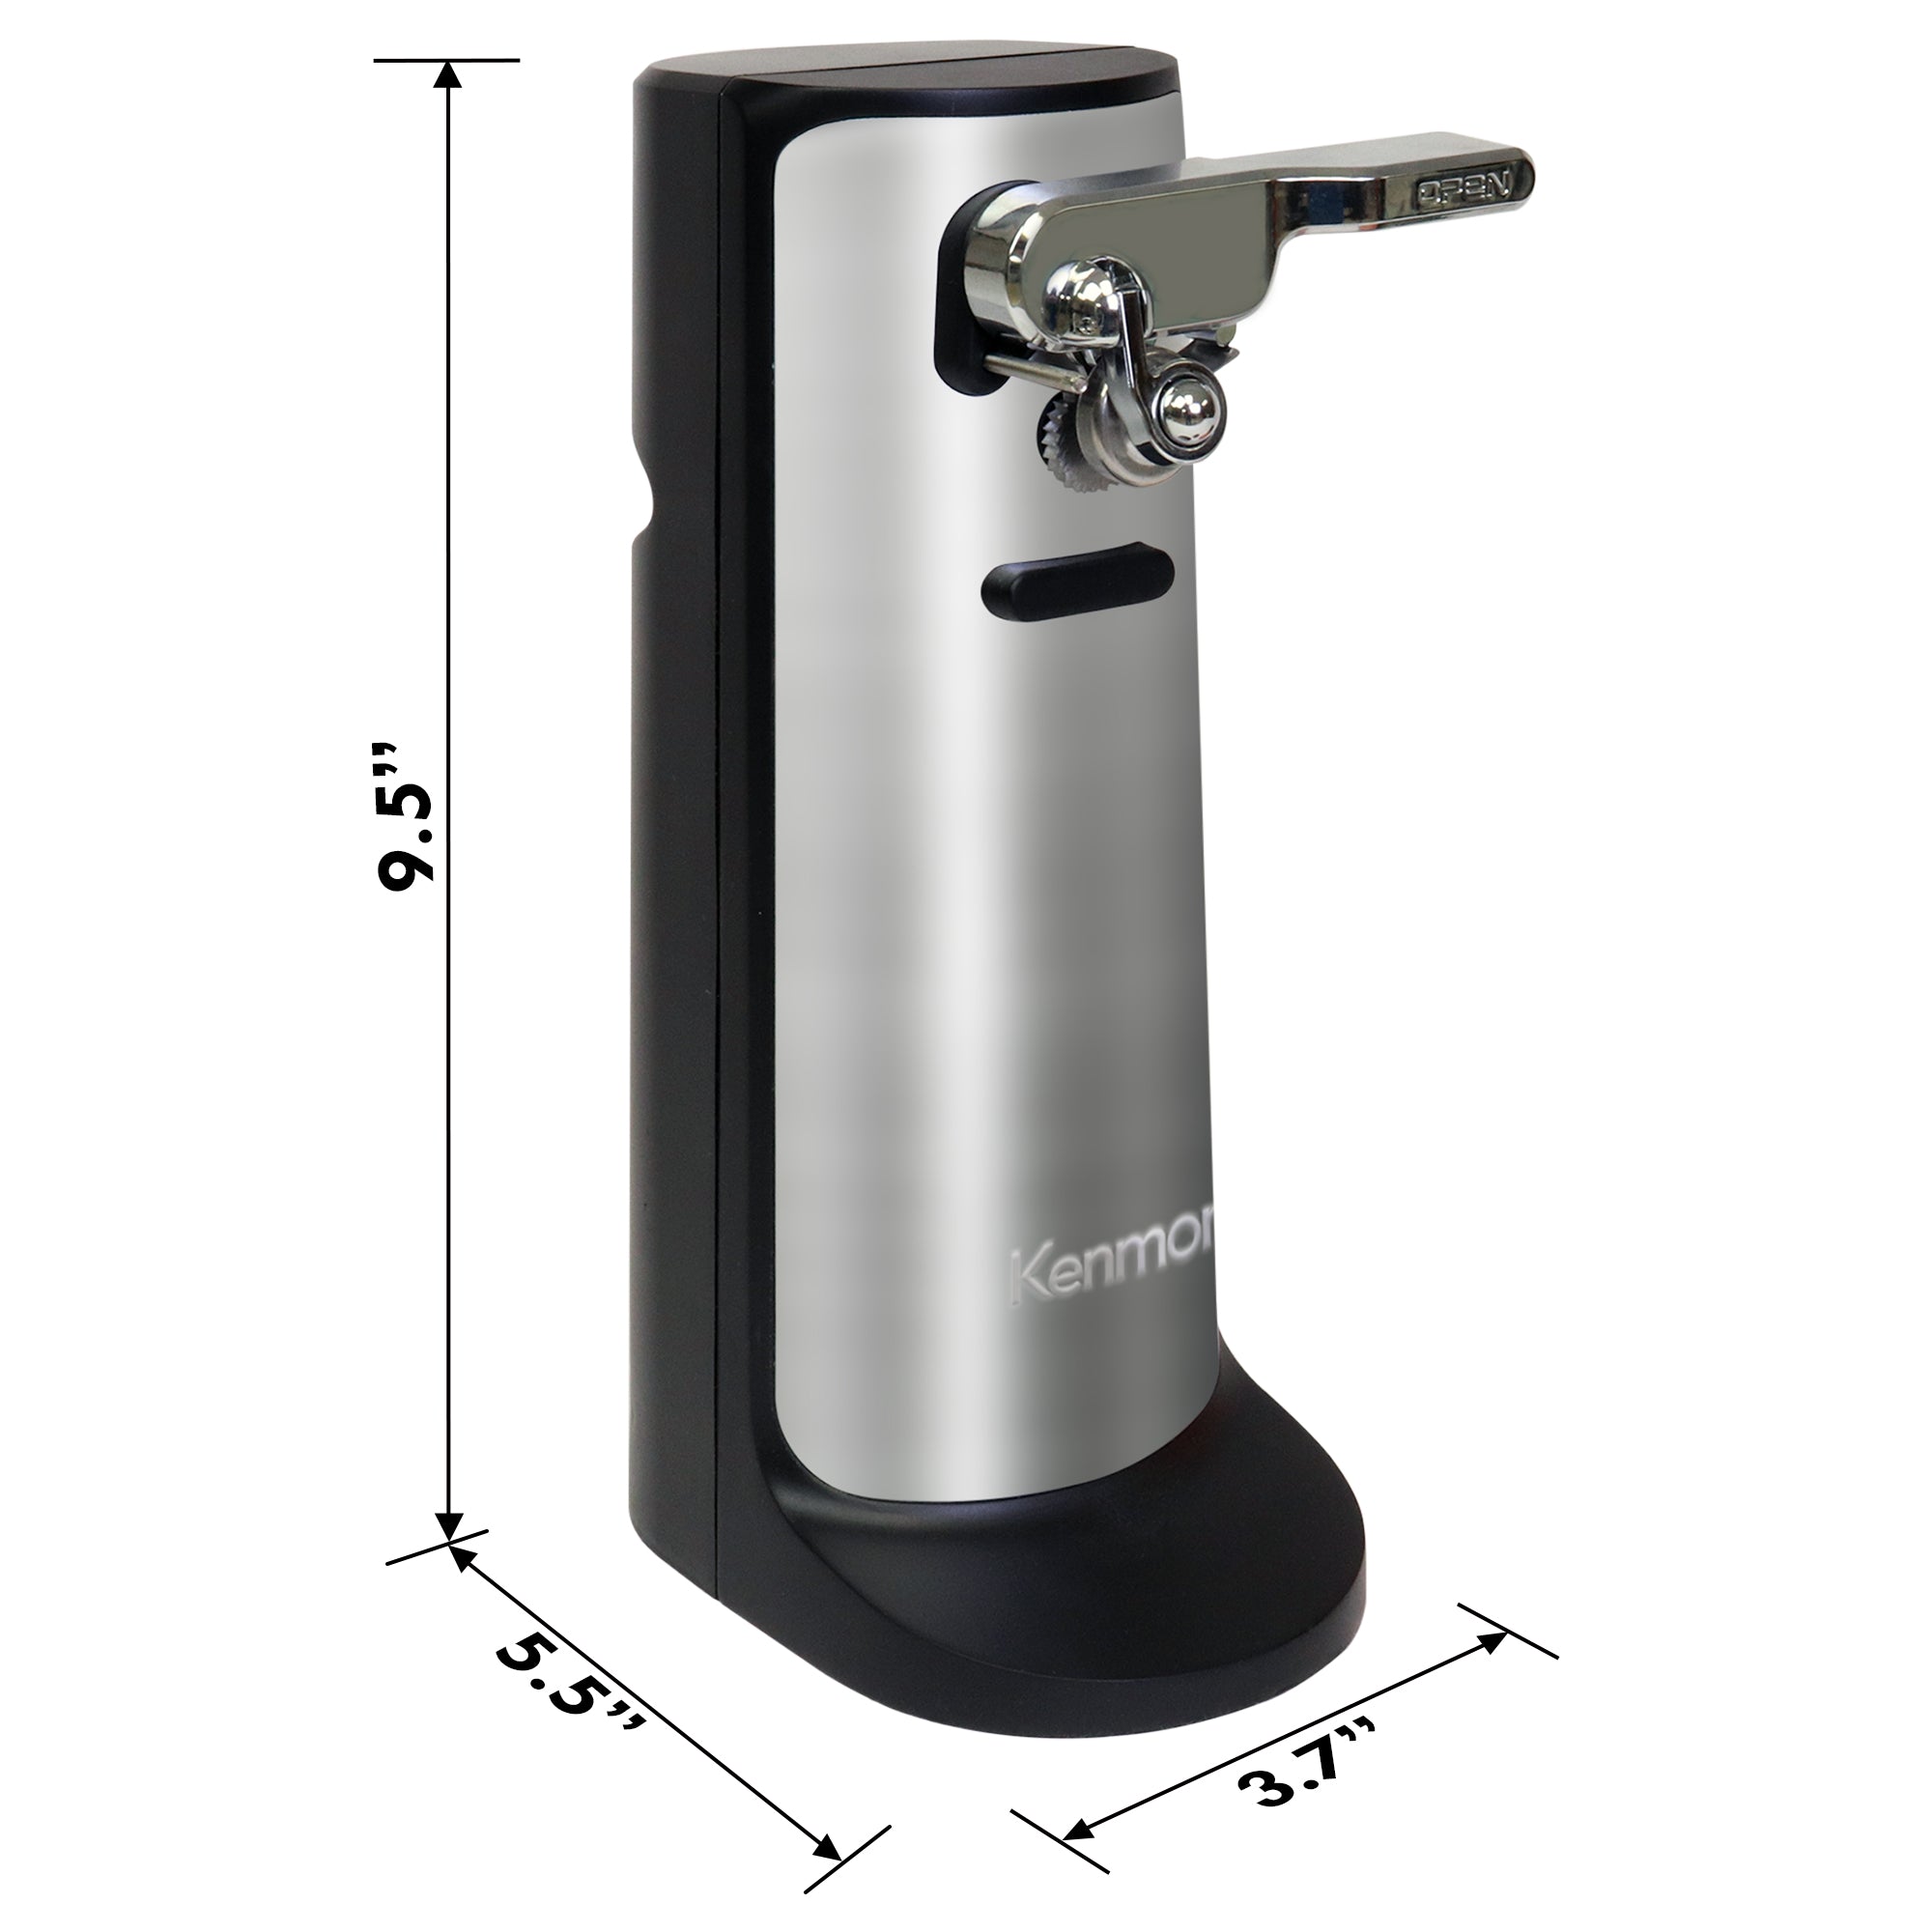 Kenmore stainless steel automatic can opener on a white background with dimensions labeled